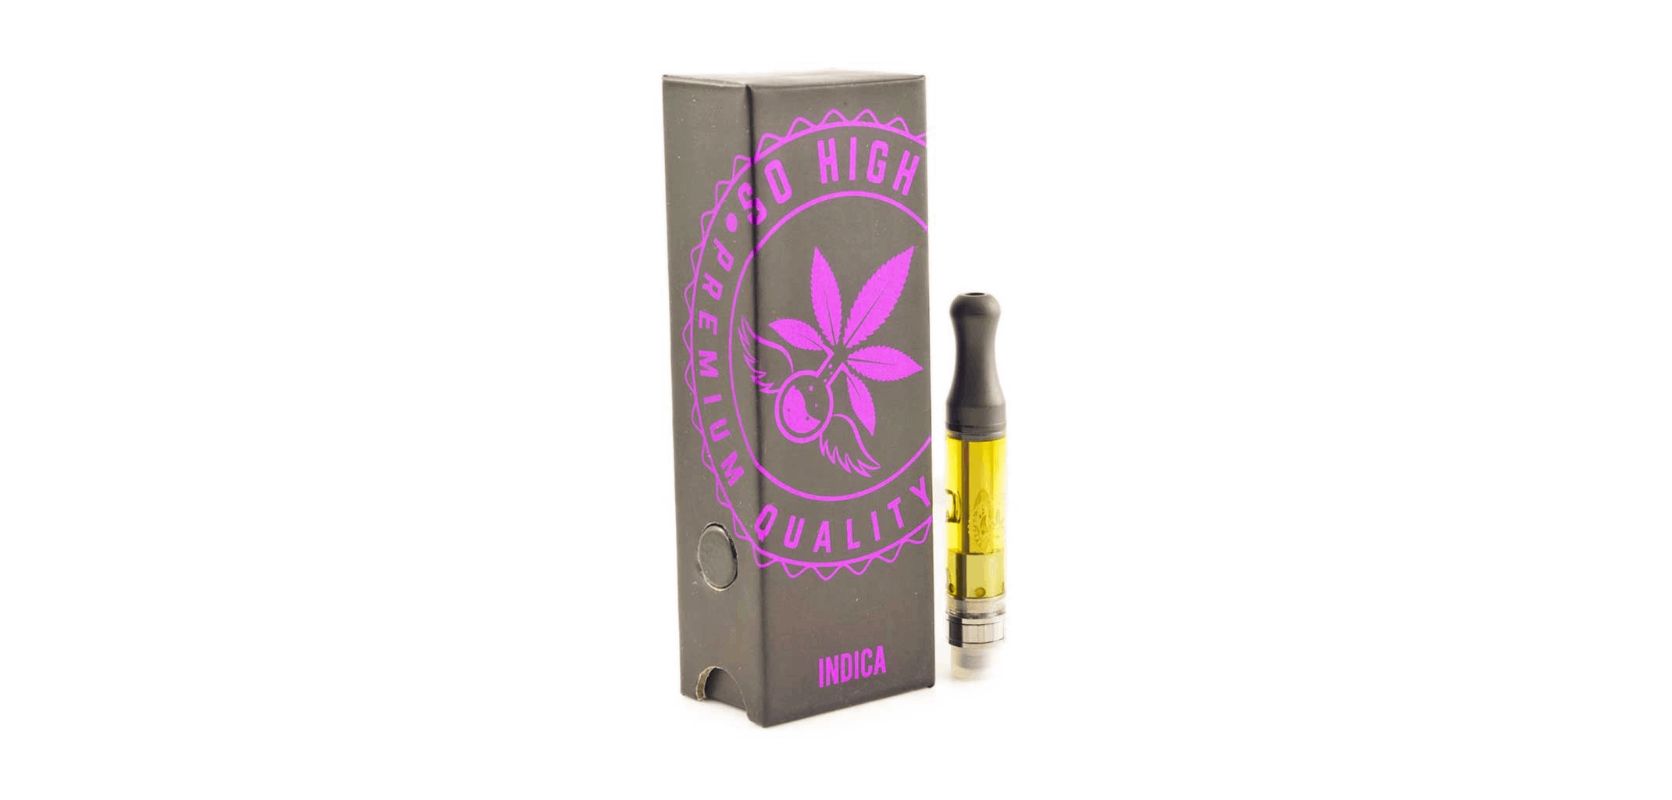 The So High Extracts Premium Vape 1ML THC – Bubba Kush (Indica) will immediately impress you with its outstanding quality and efficacy.